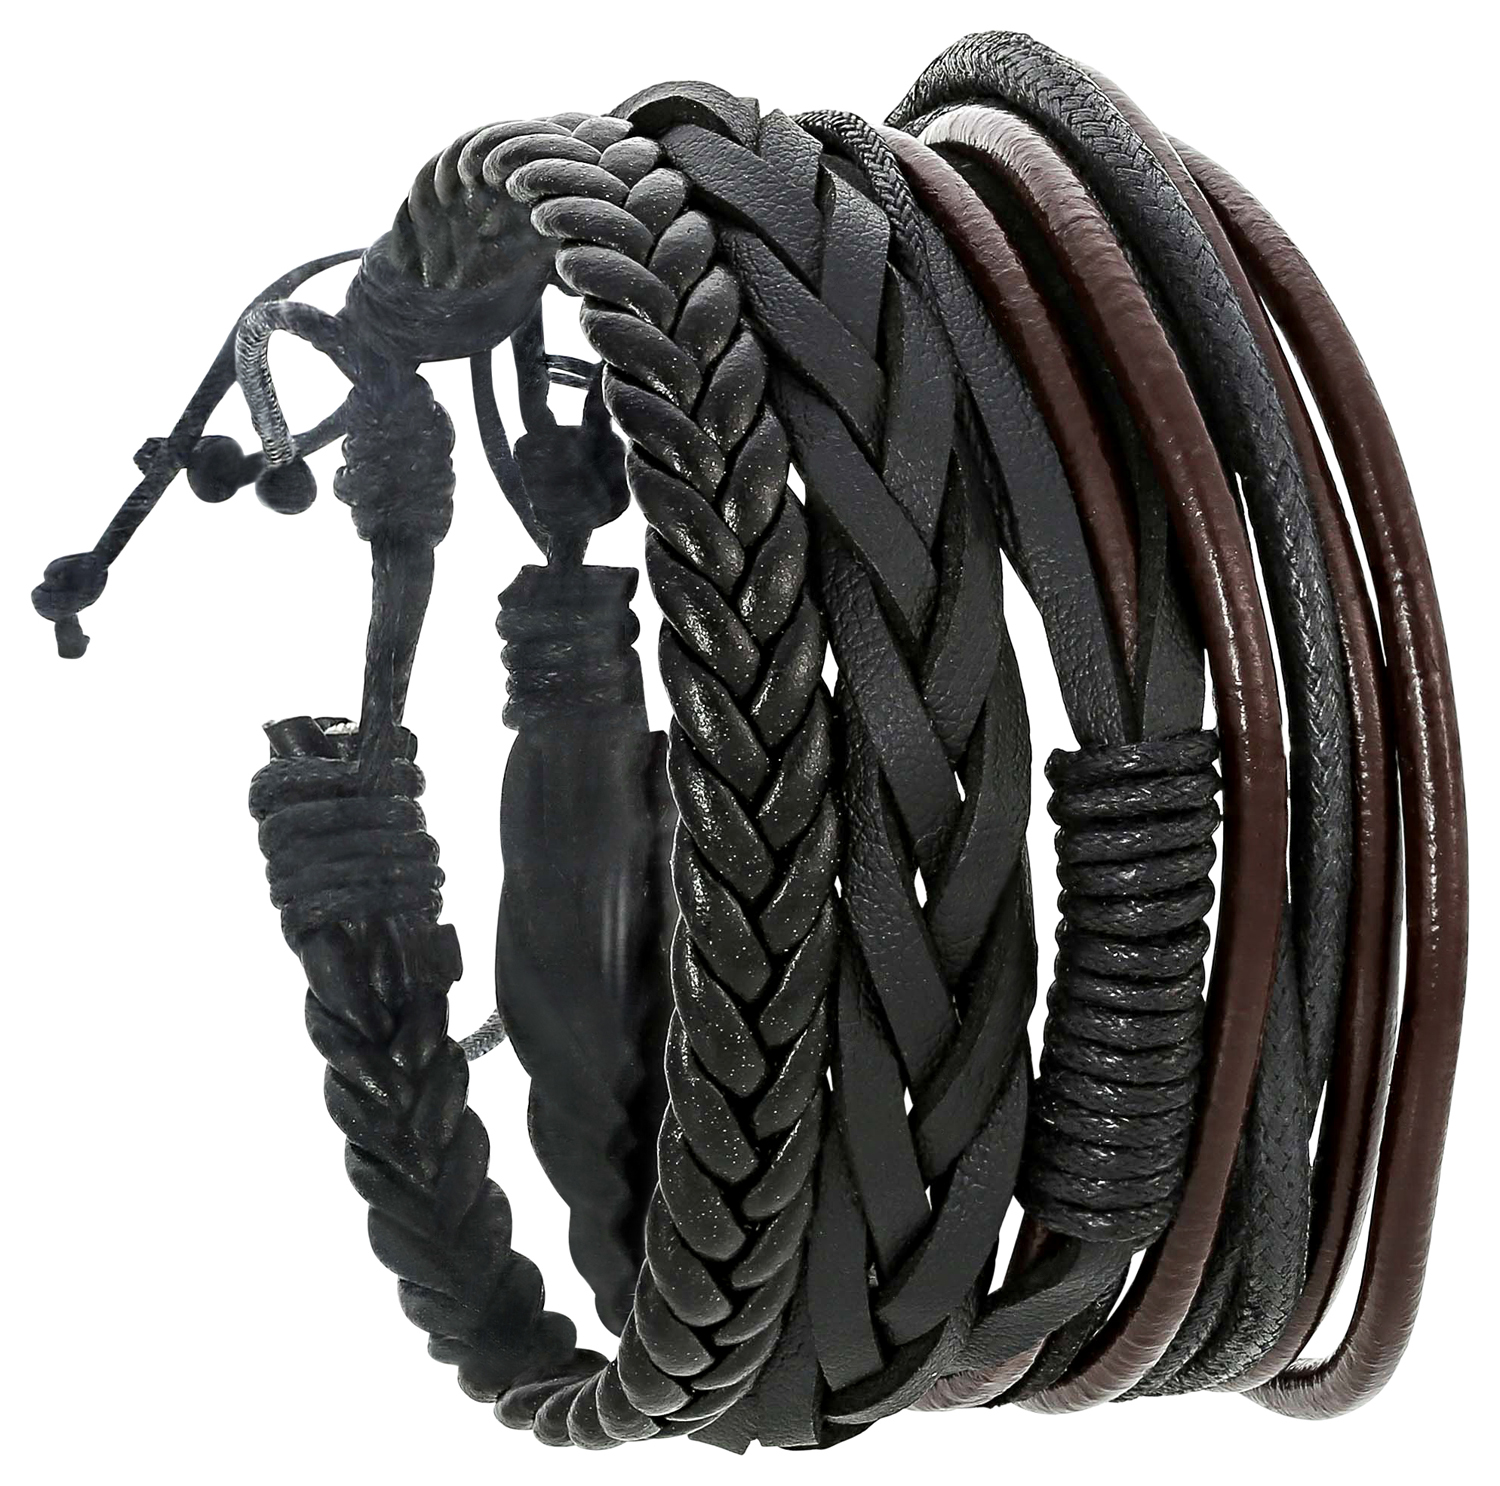 Pulsera Hombre - Much Leather